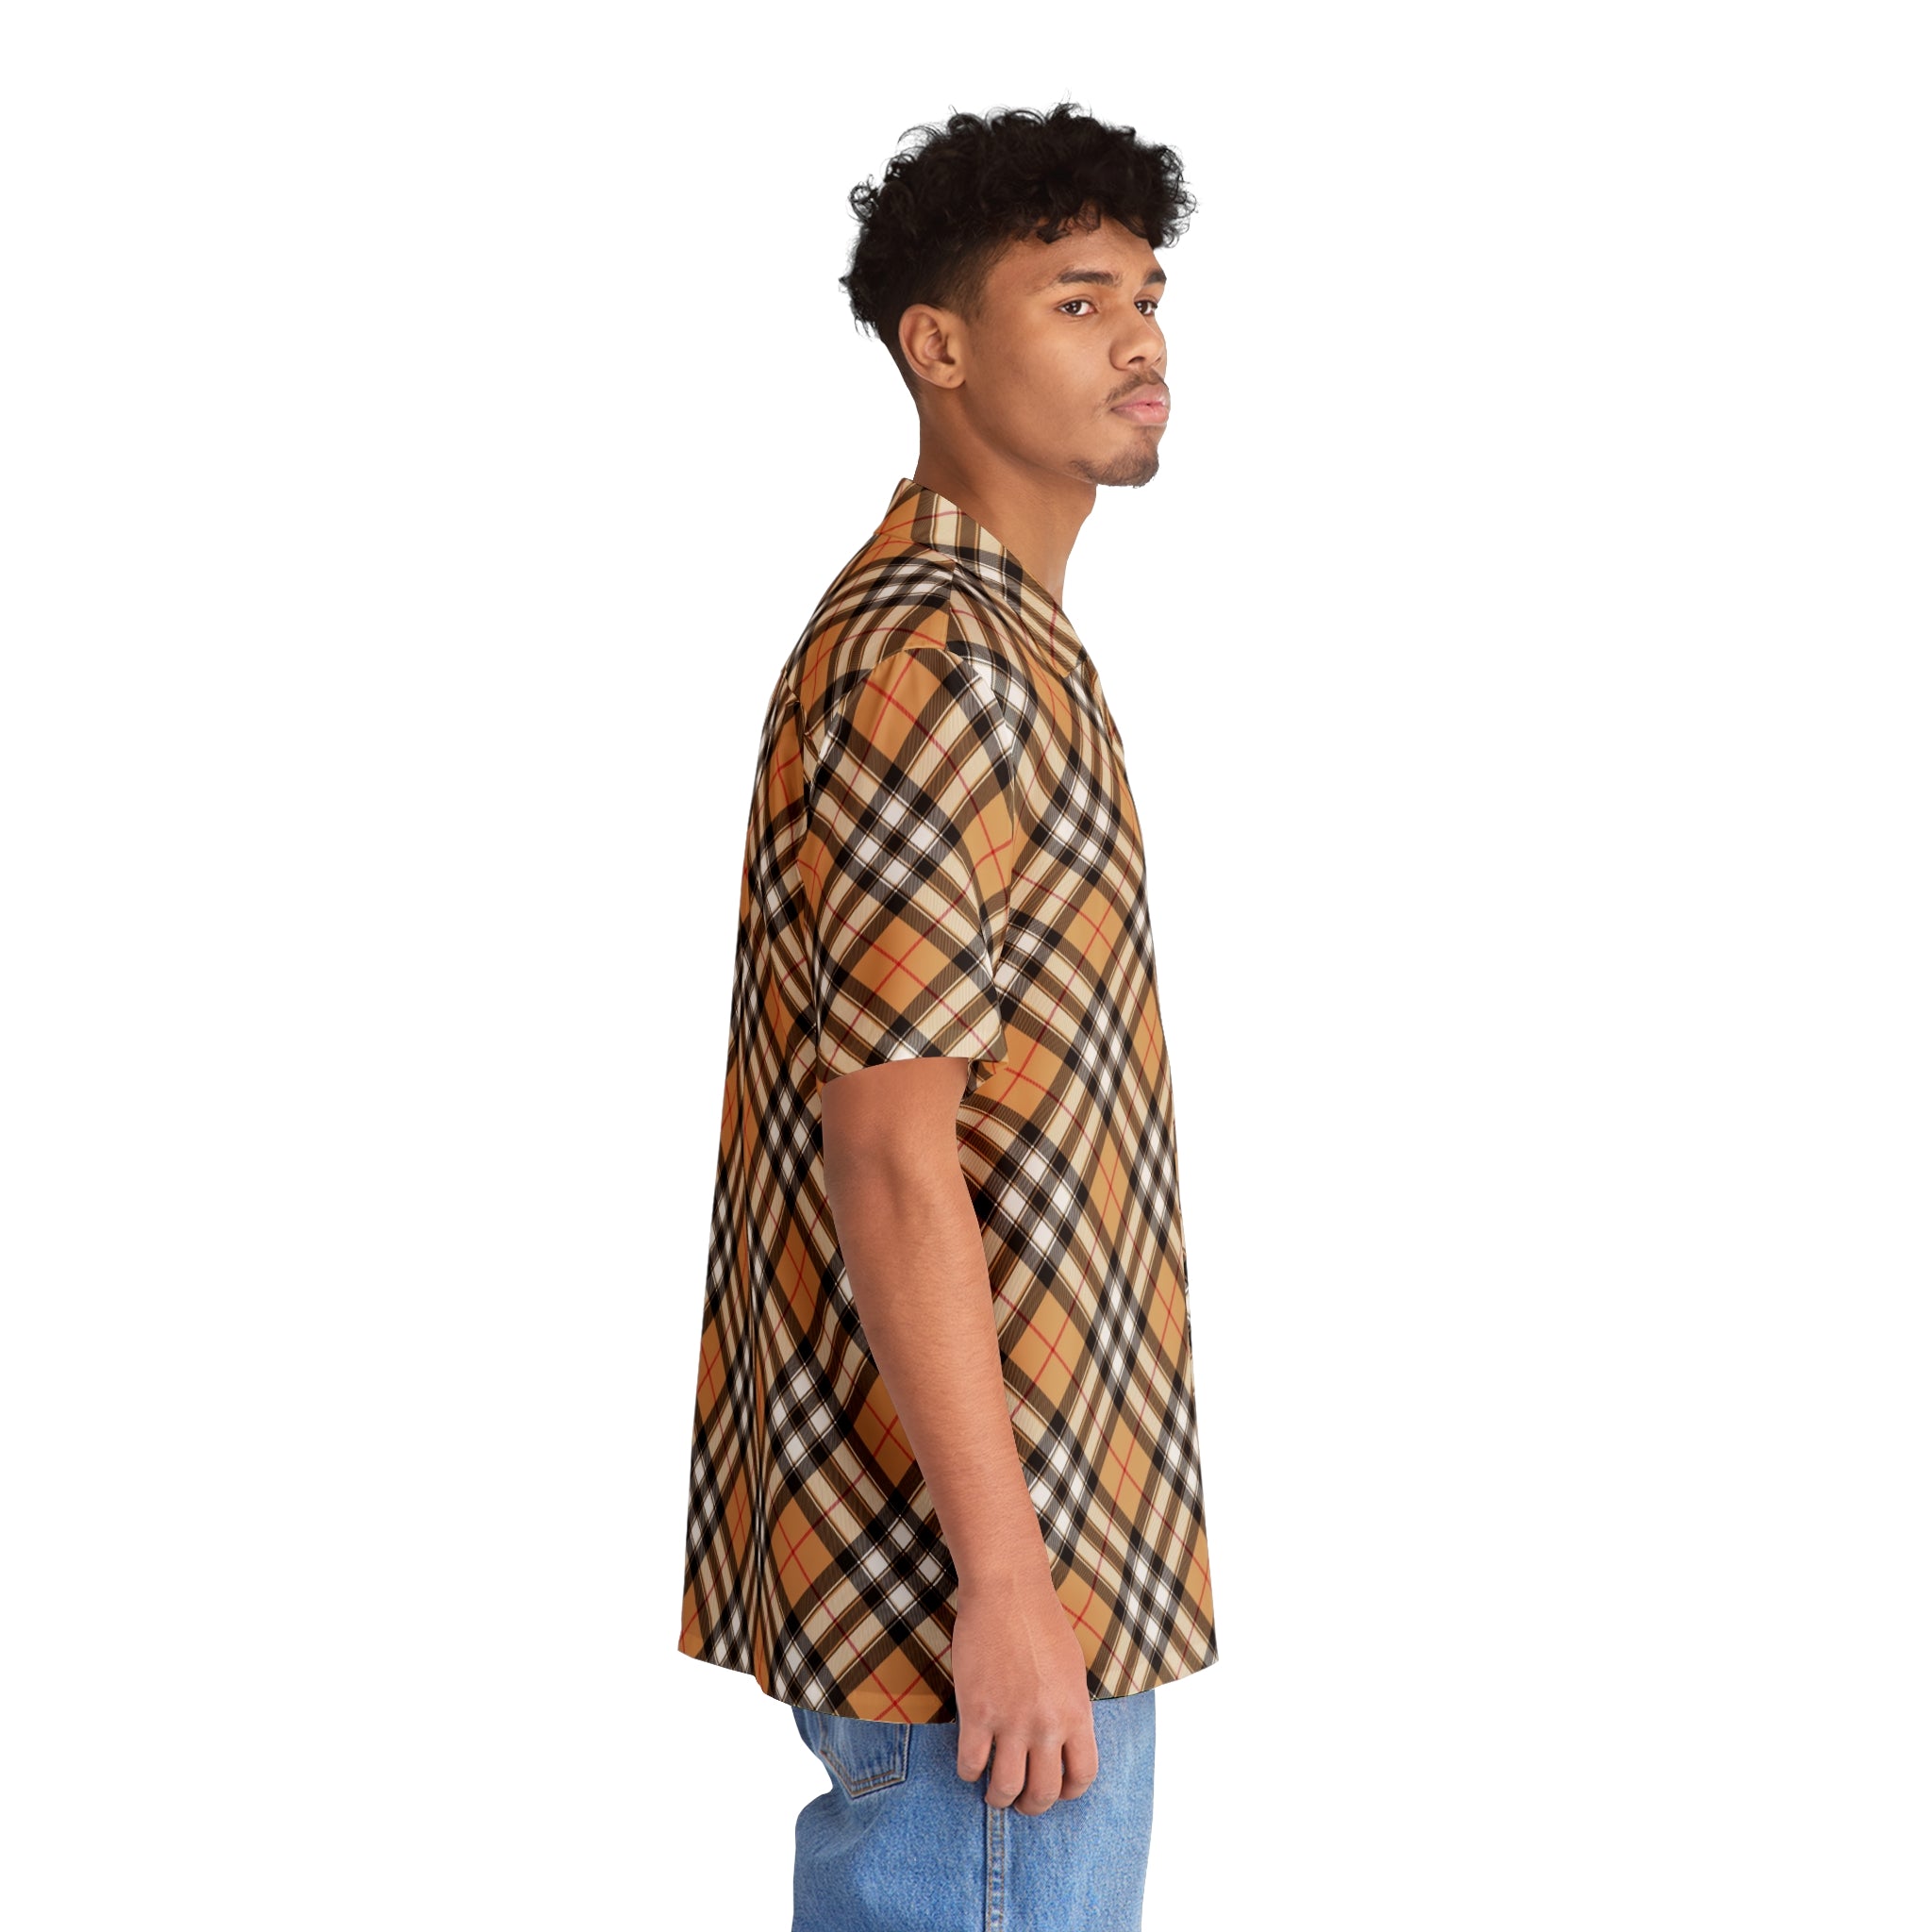  Groove Collection in Plaid (Red Stripe) Button Up Shirt, Hawaiian Shirt Men's Shirts